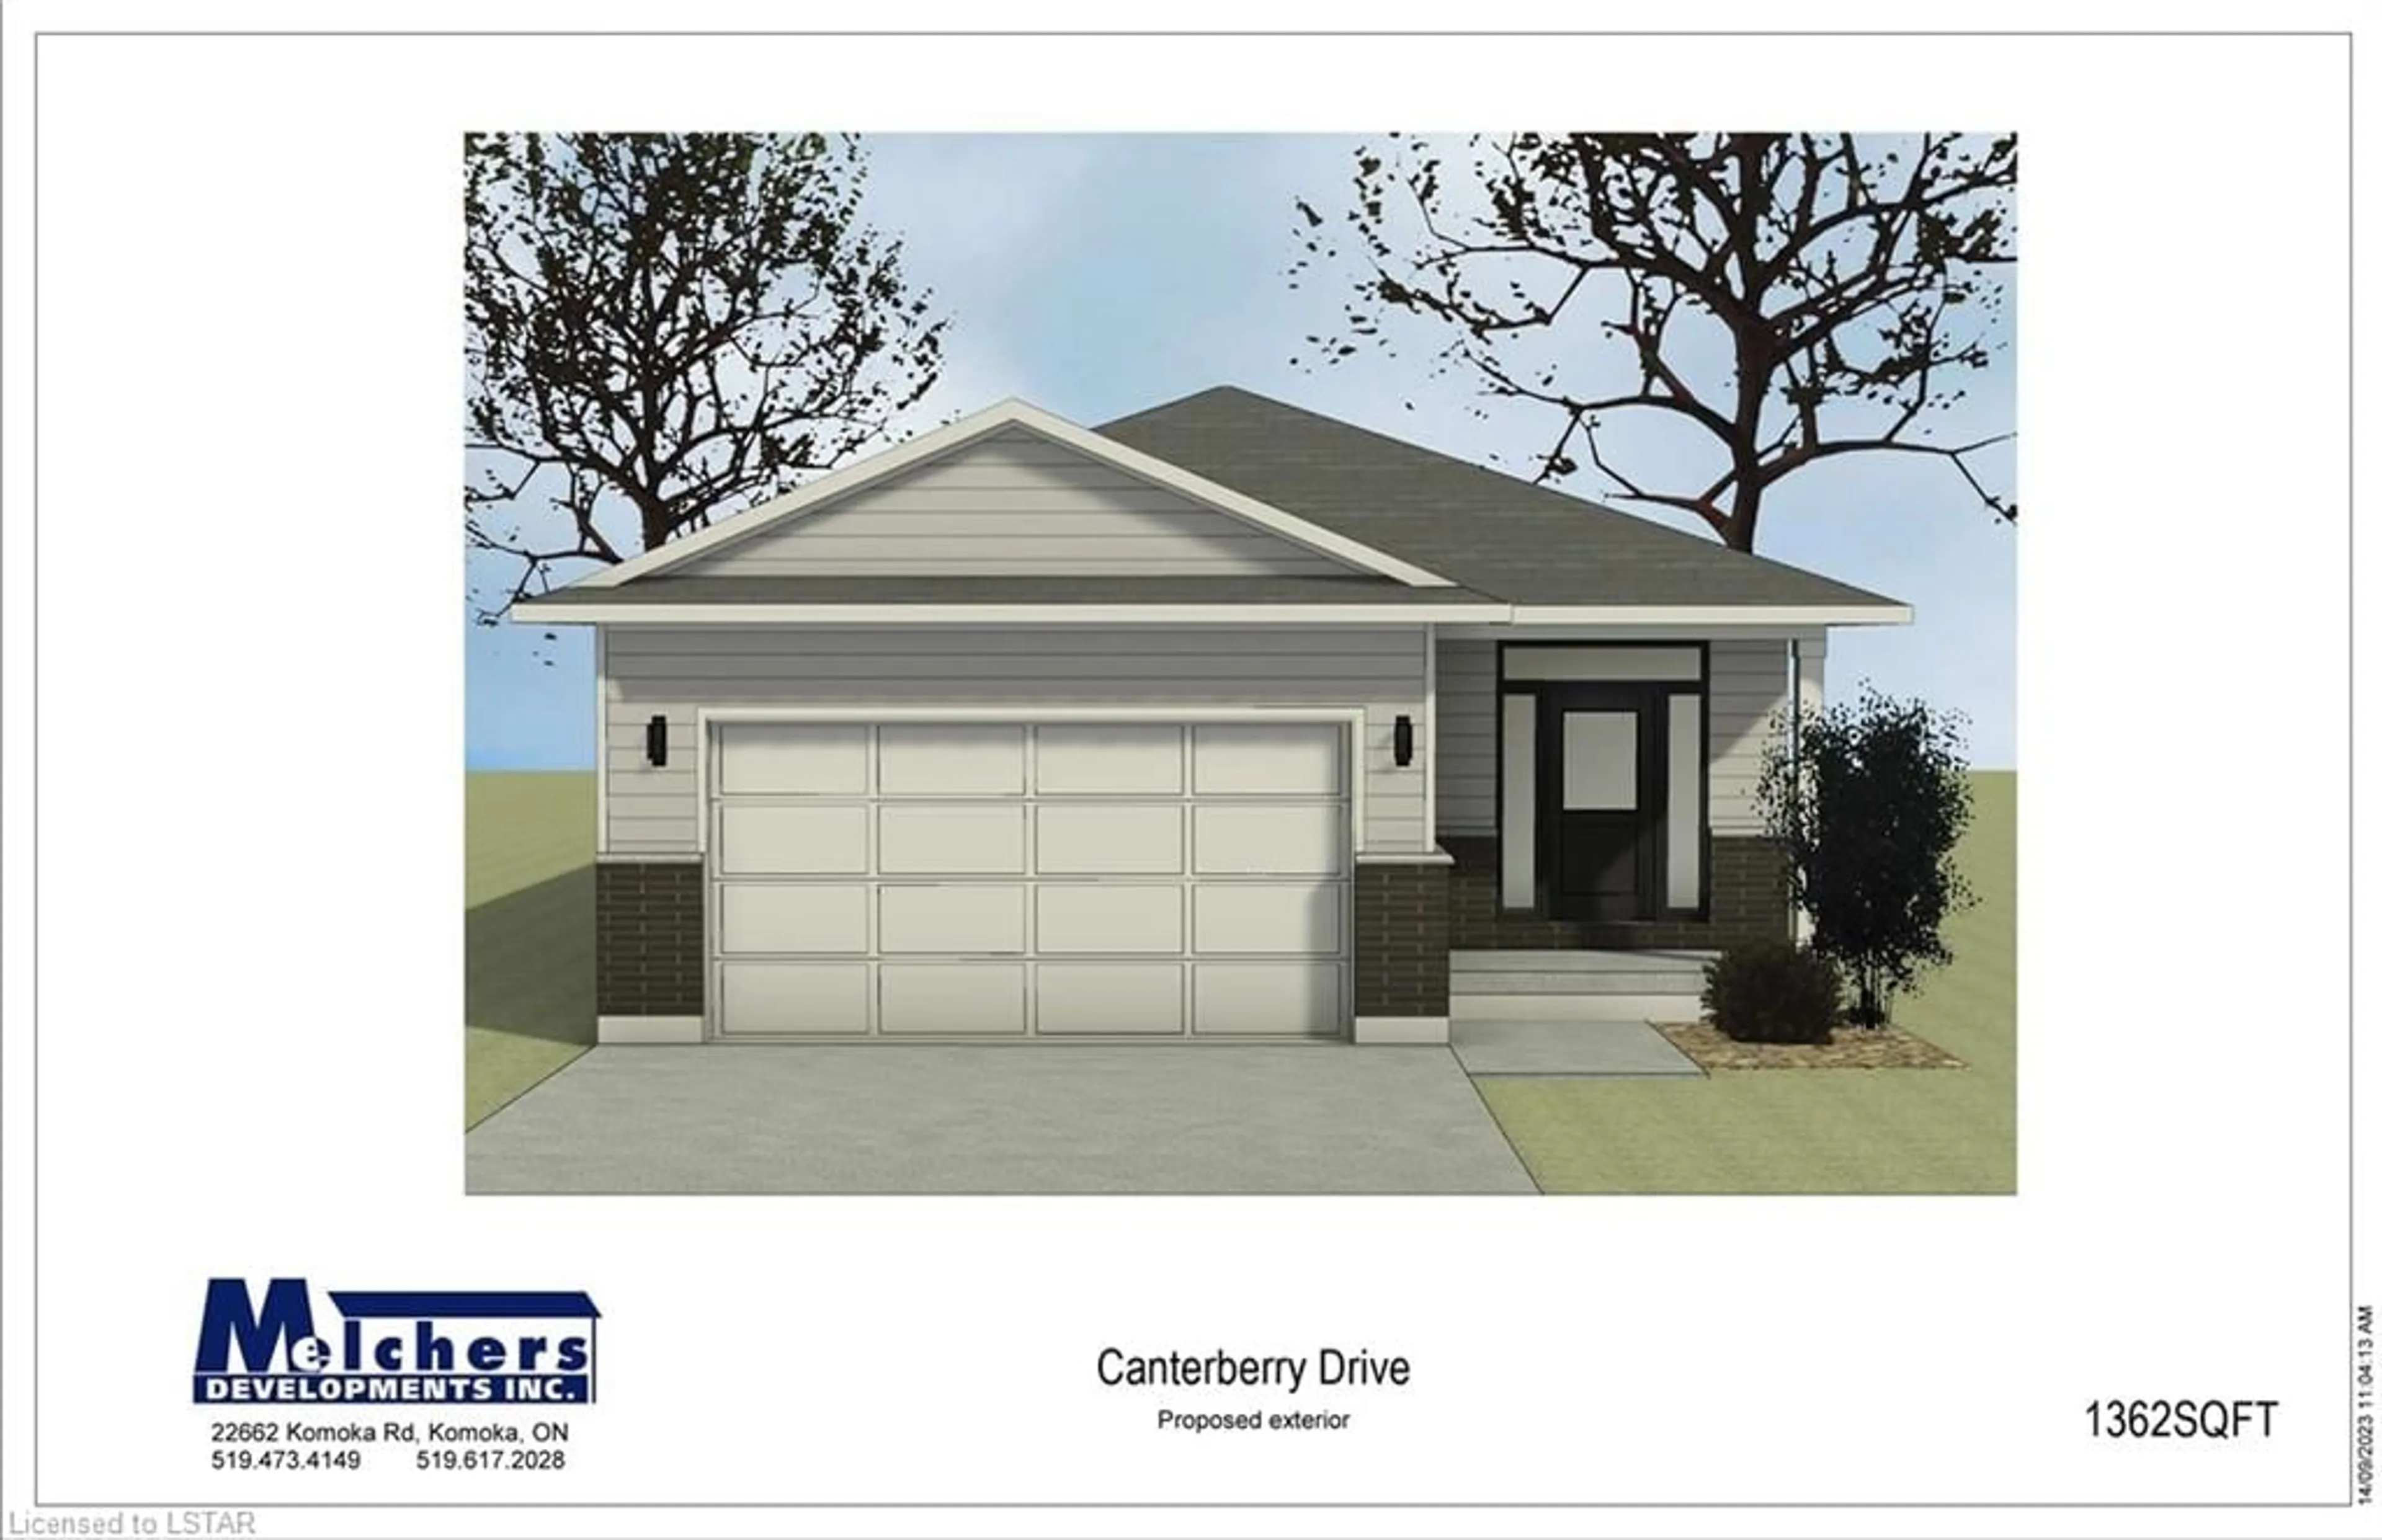 Home with vinyl exterior material for LOT 1 Ashford St, Belmont Ontario 000 000